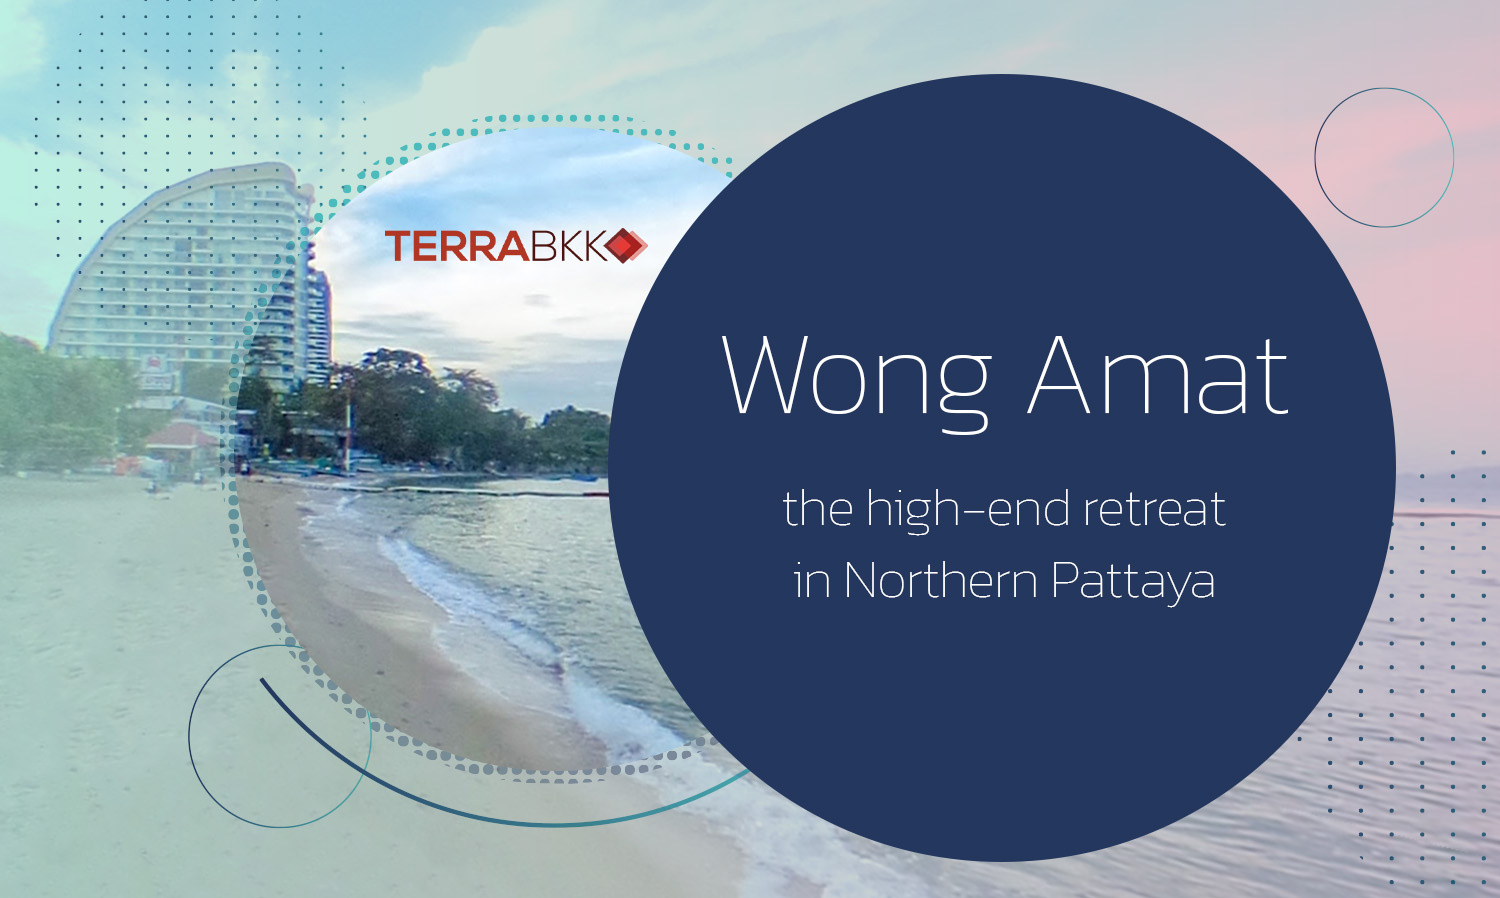 “Wong Amat” the high-end retreat in Northern Pattaya